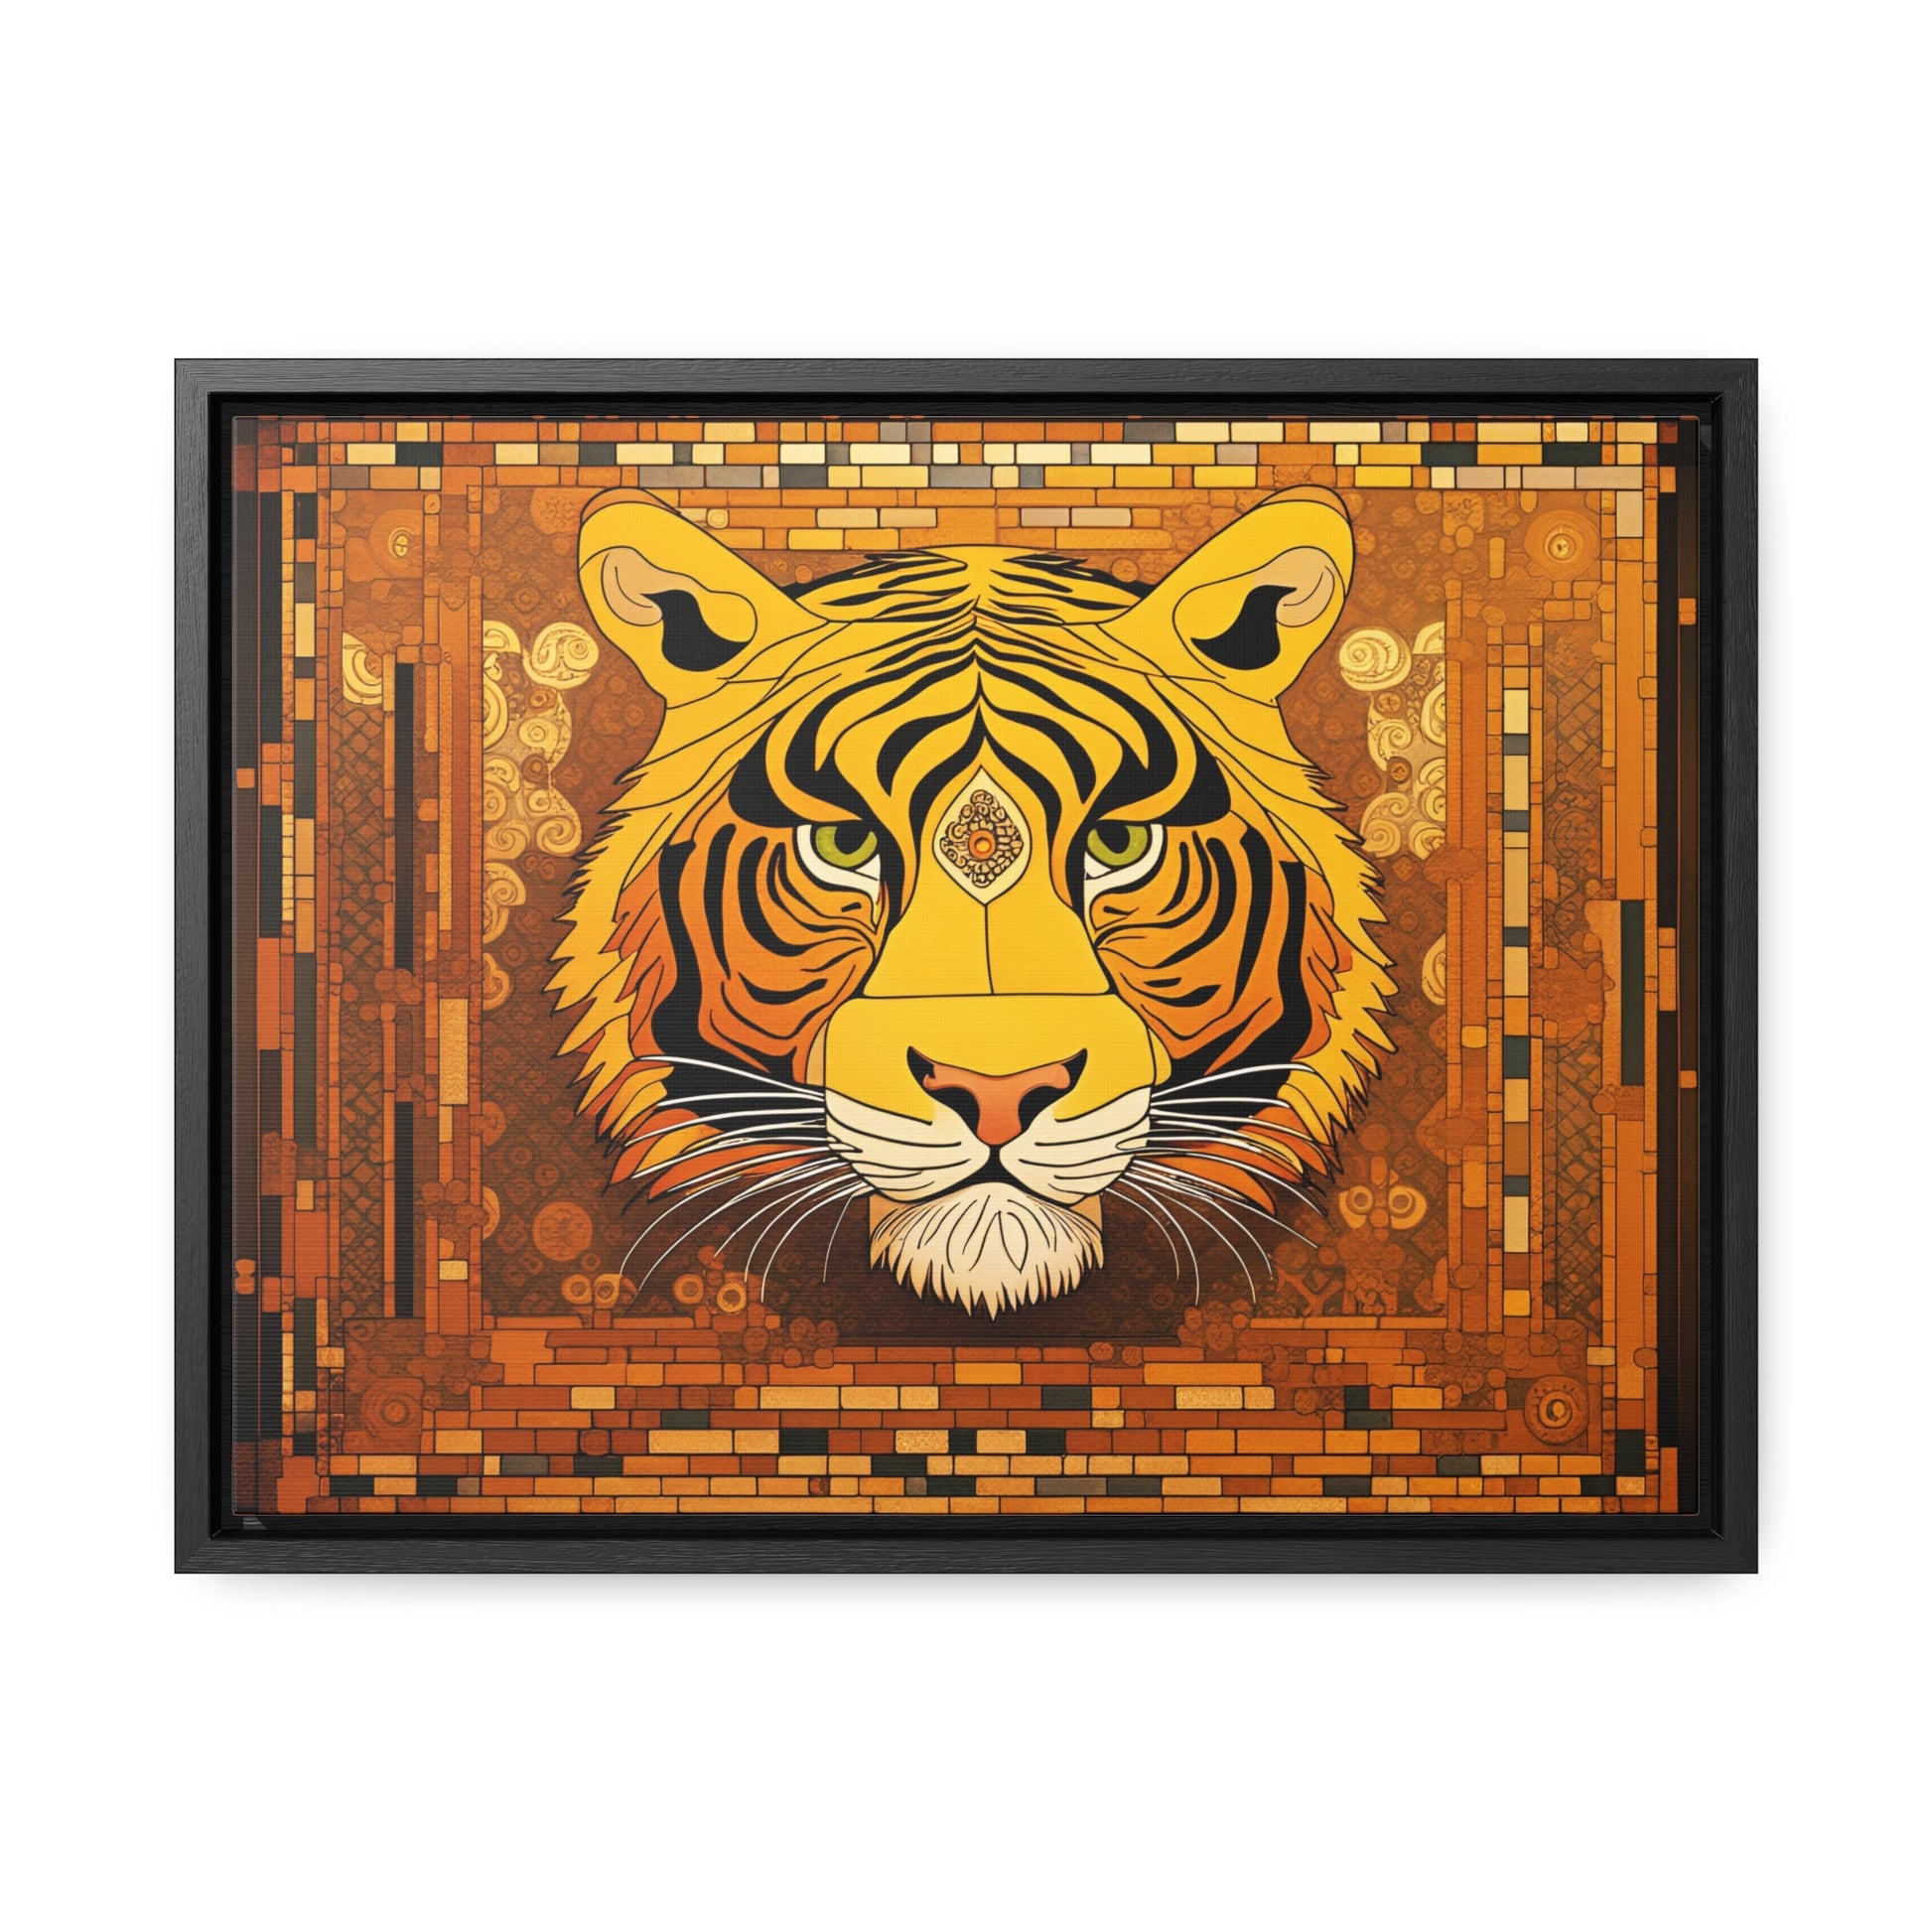 Tiger Head in the Style of Gustav Klimt Print on Canvas in a Floating Frame 16x12